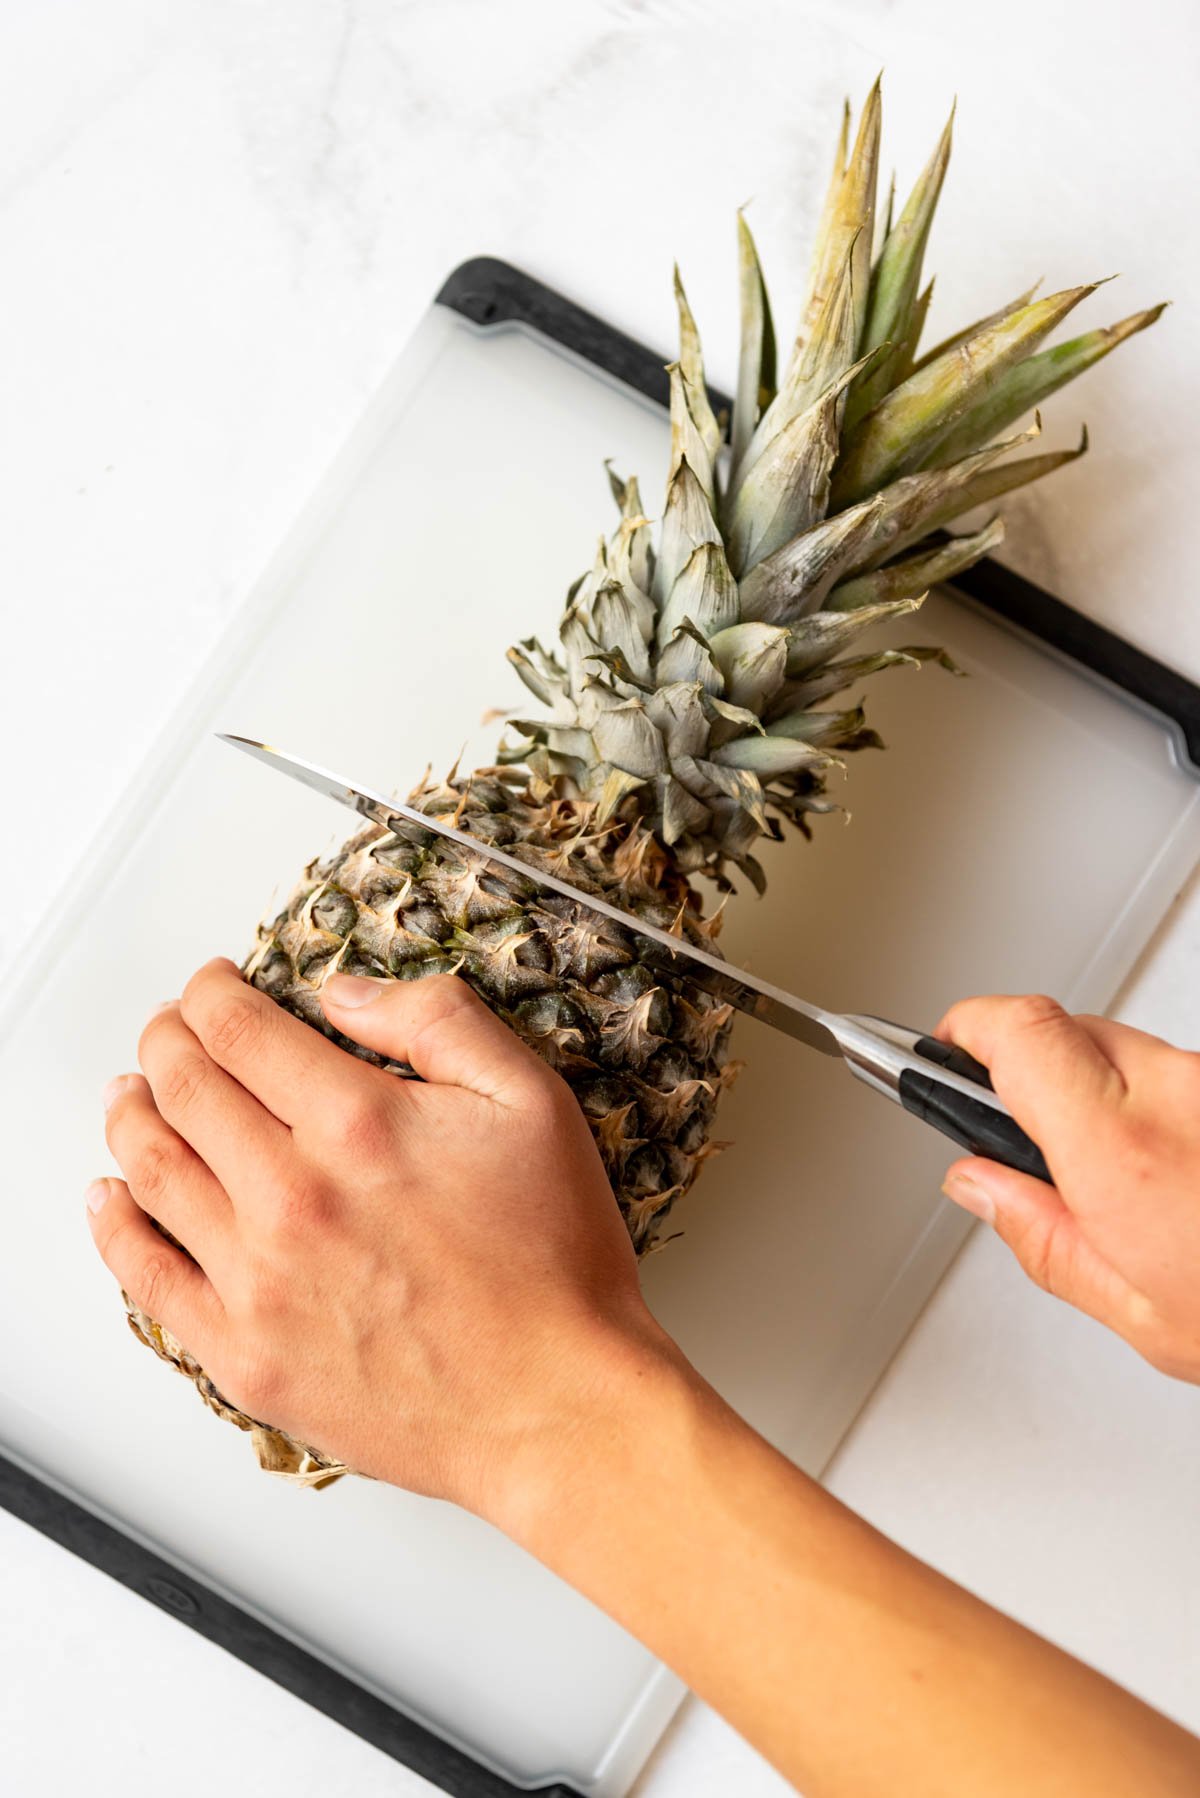 A hand using a knife to cut off the top or crown of a fresh pineapple.